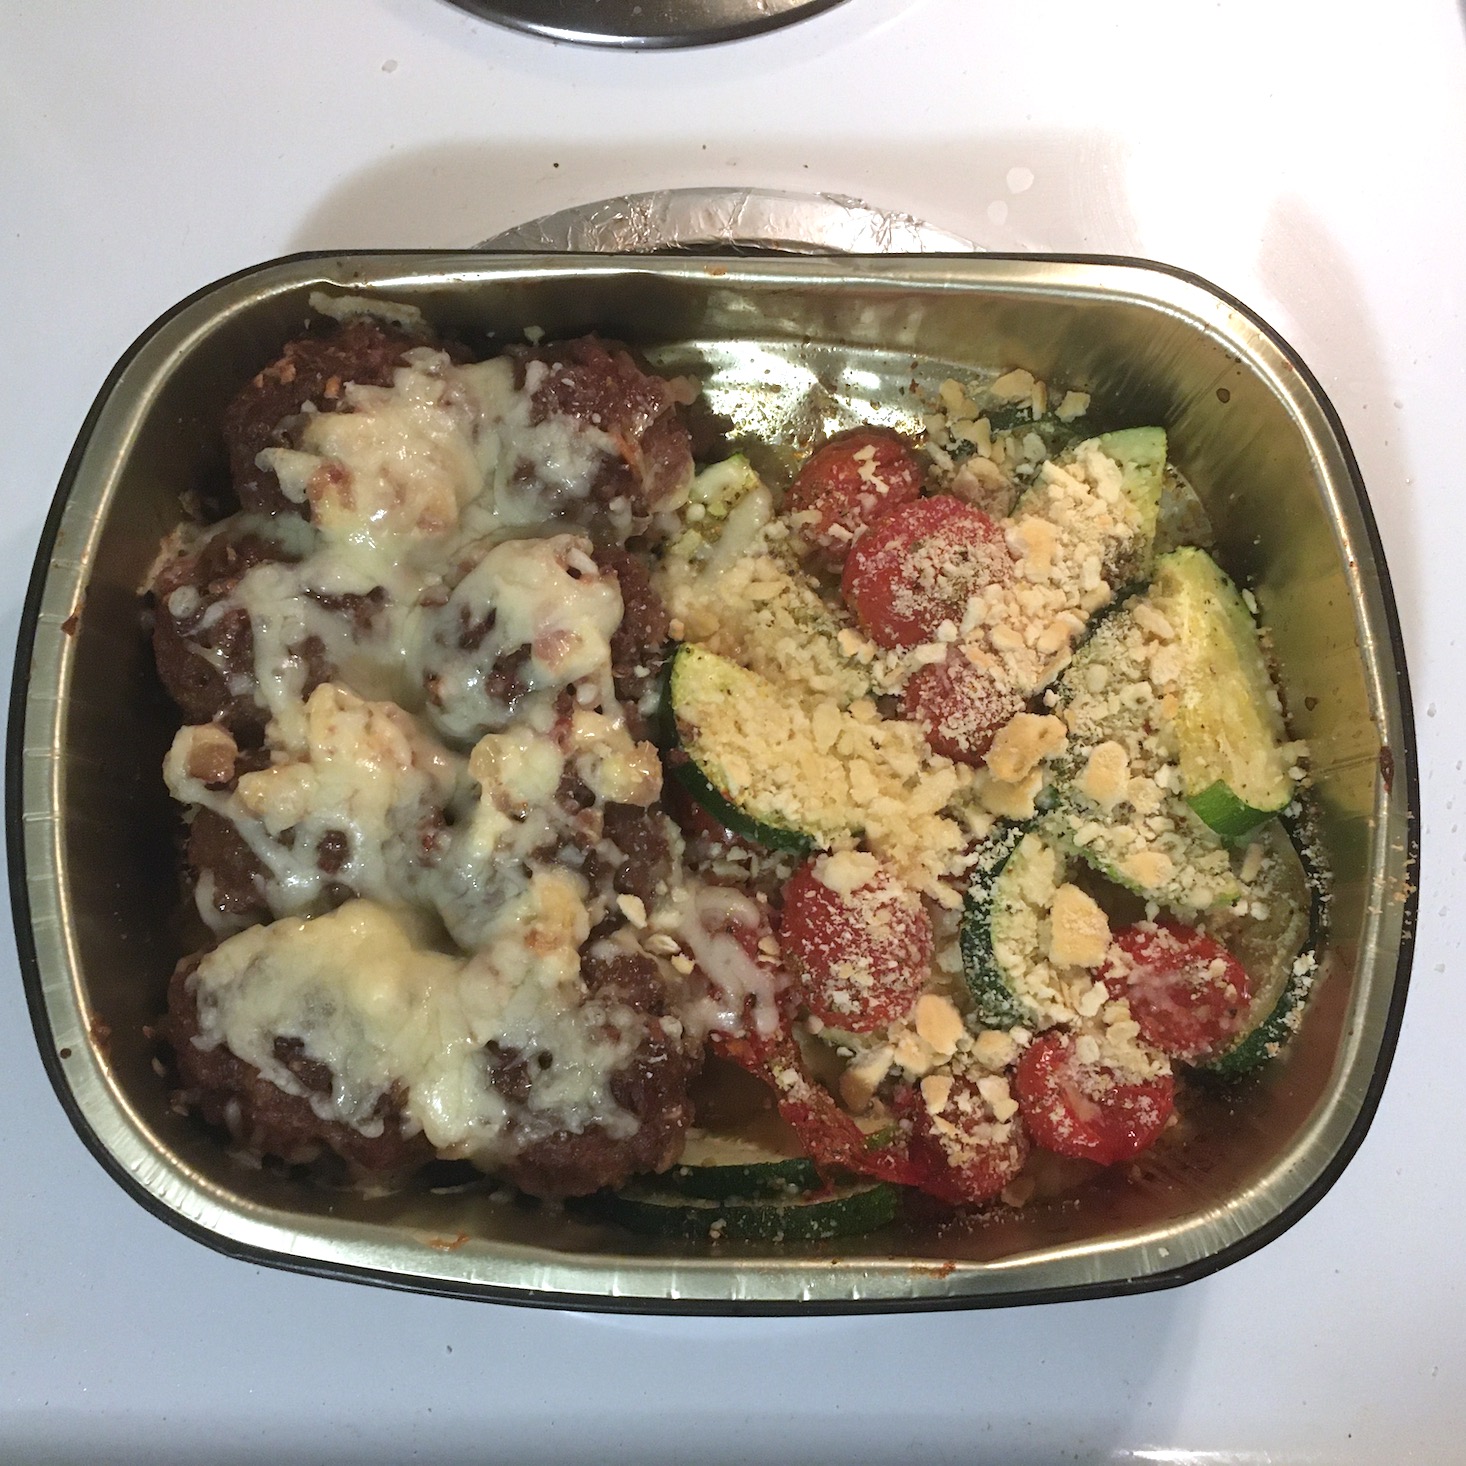 meatballs finished in pan